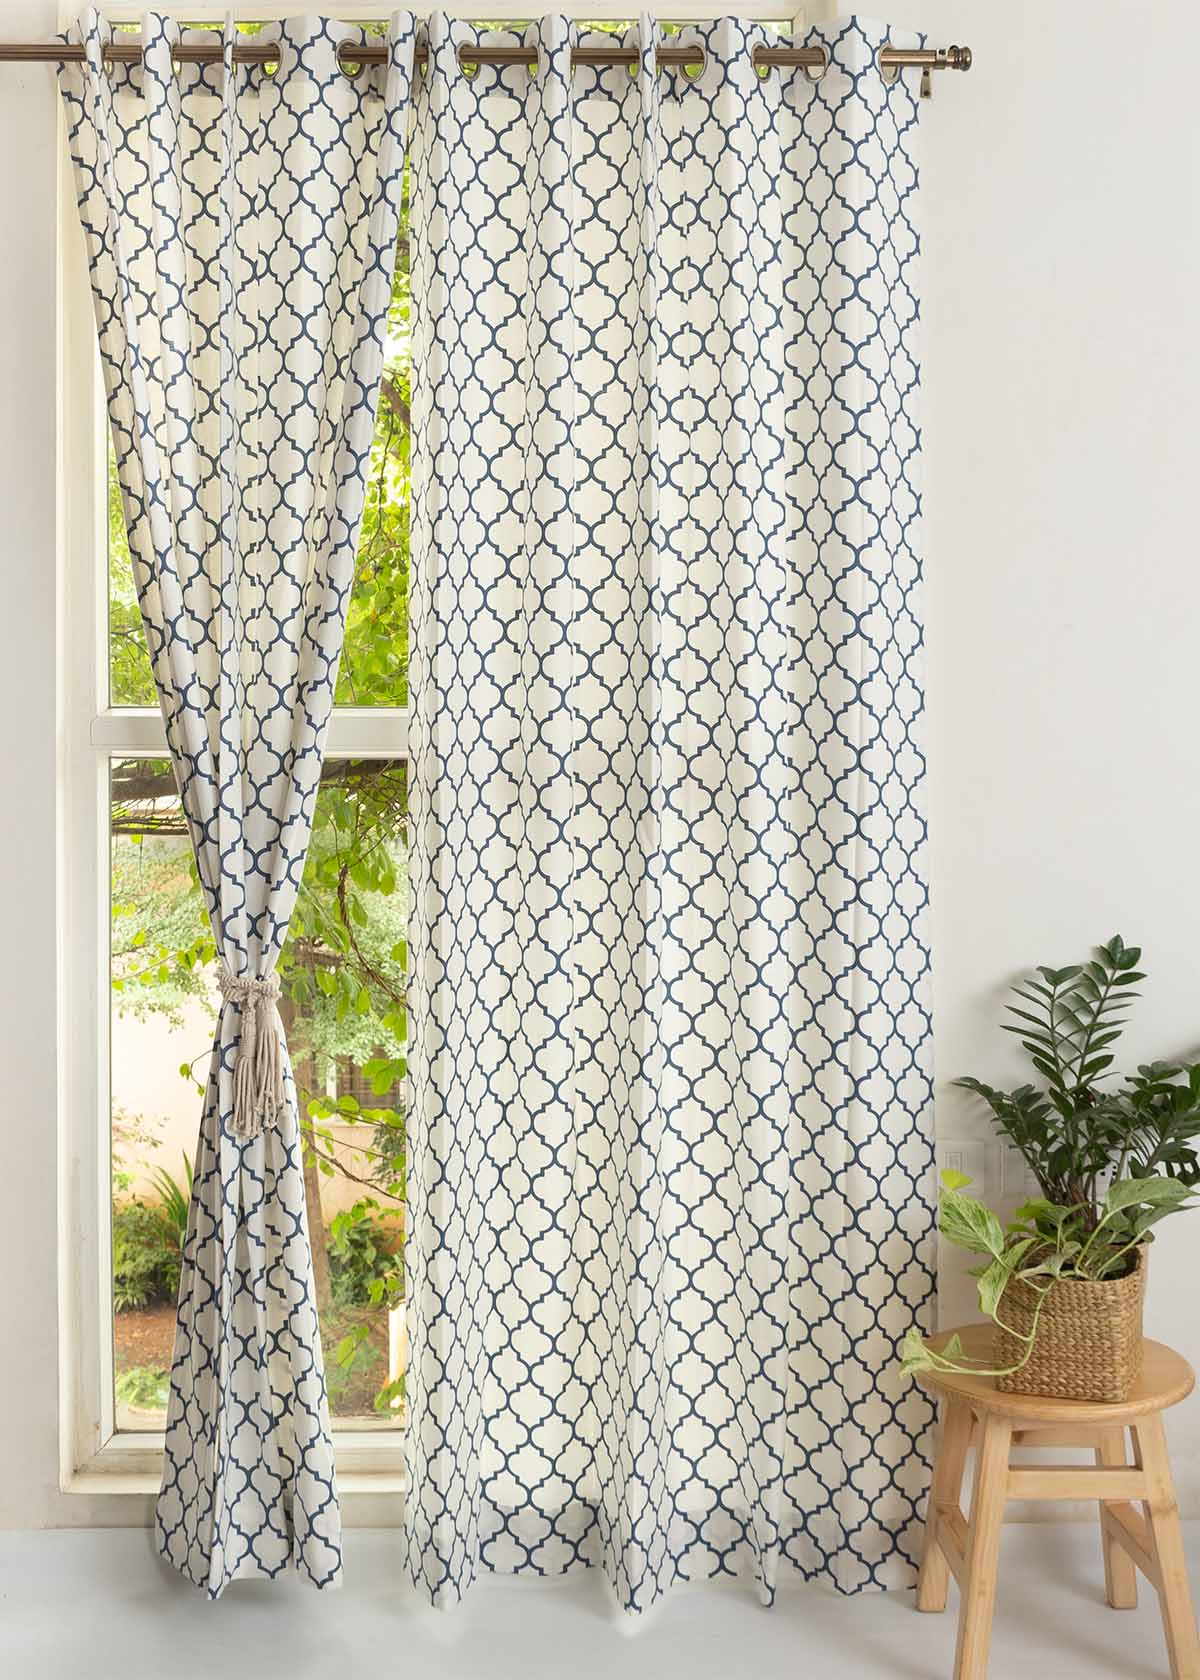 Trellis Printed 100% cotton geometric curtain for bed room - Room darkening - Royal Blue - Pack of 1